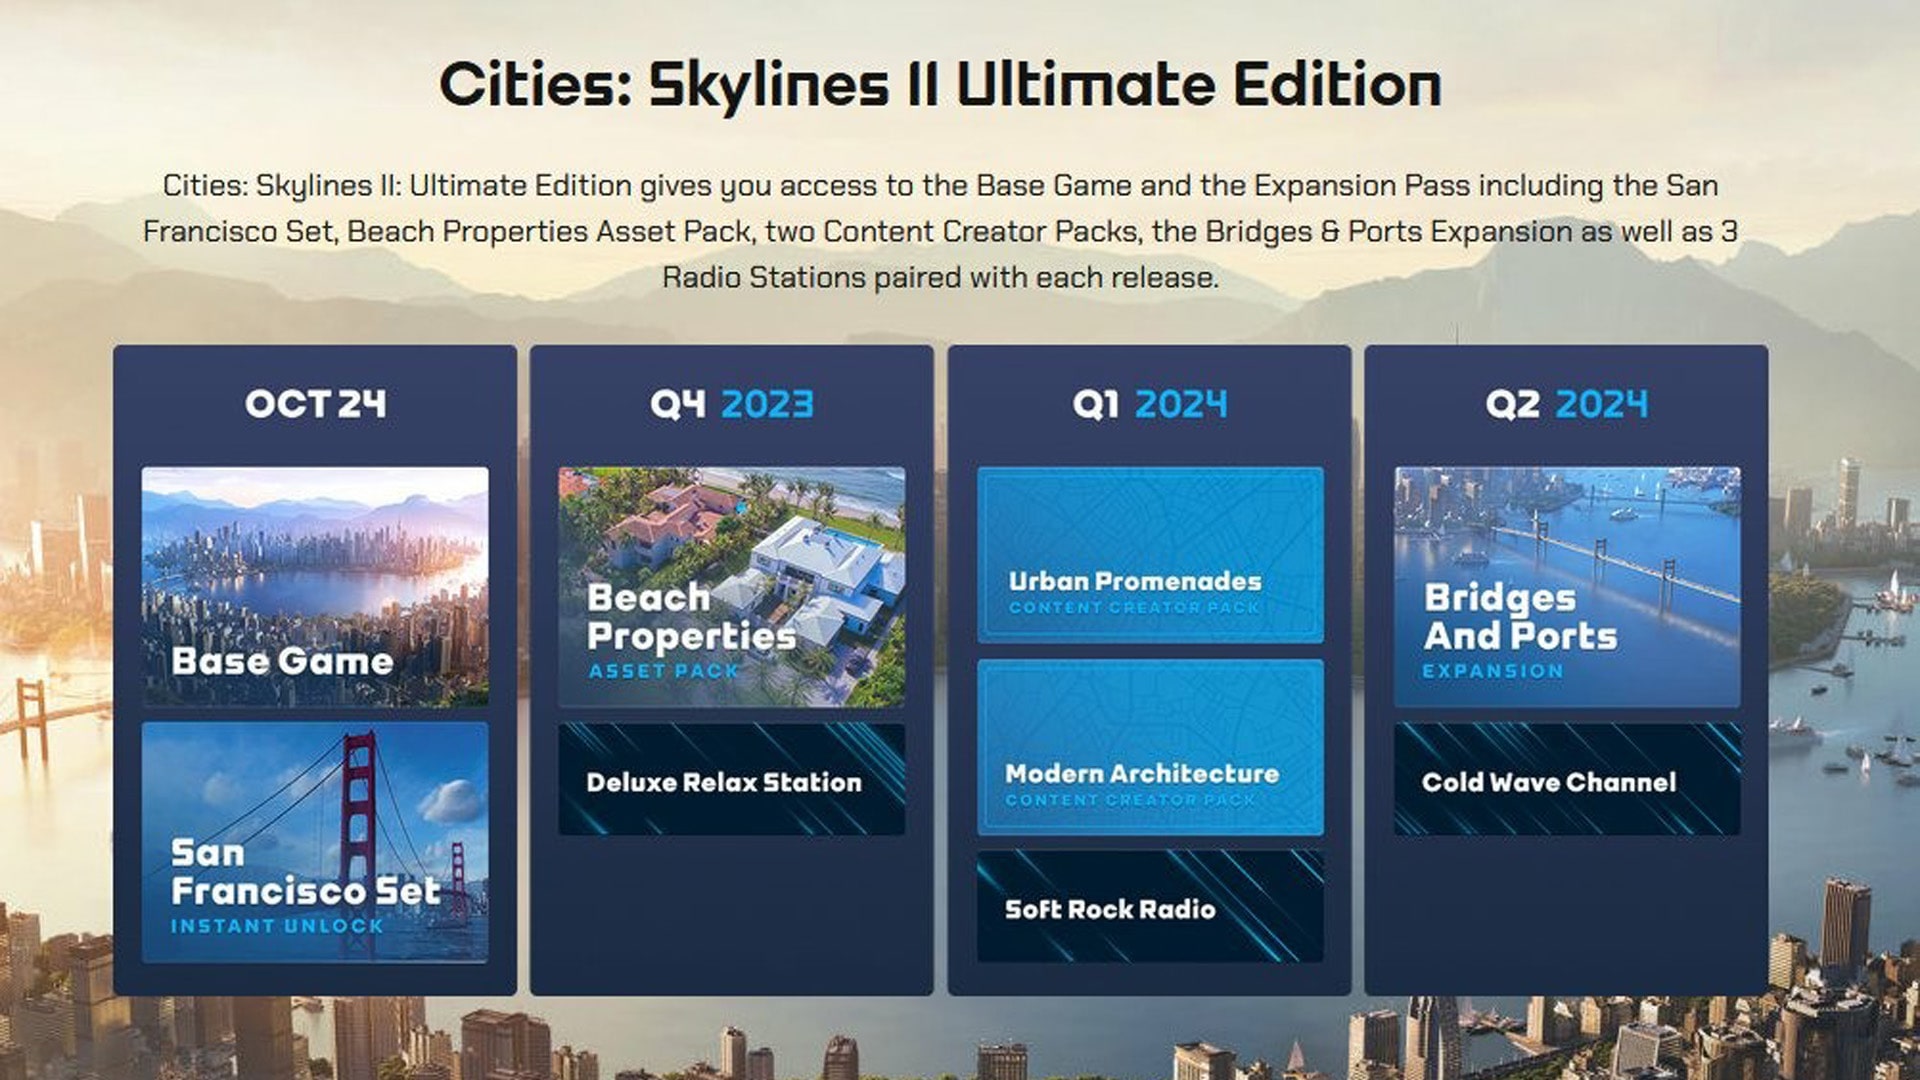 Promotional image showcasing Cities Skylines 2 Ultimate Edition content